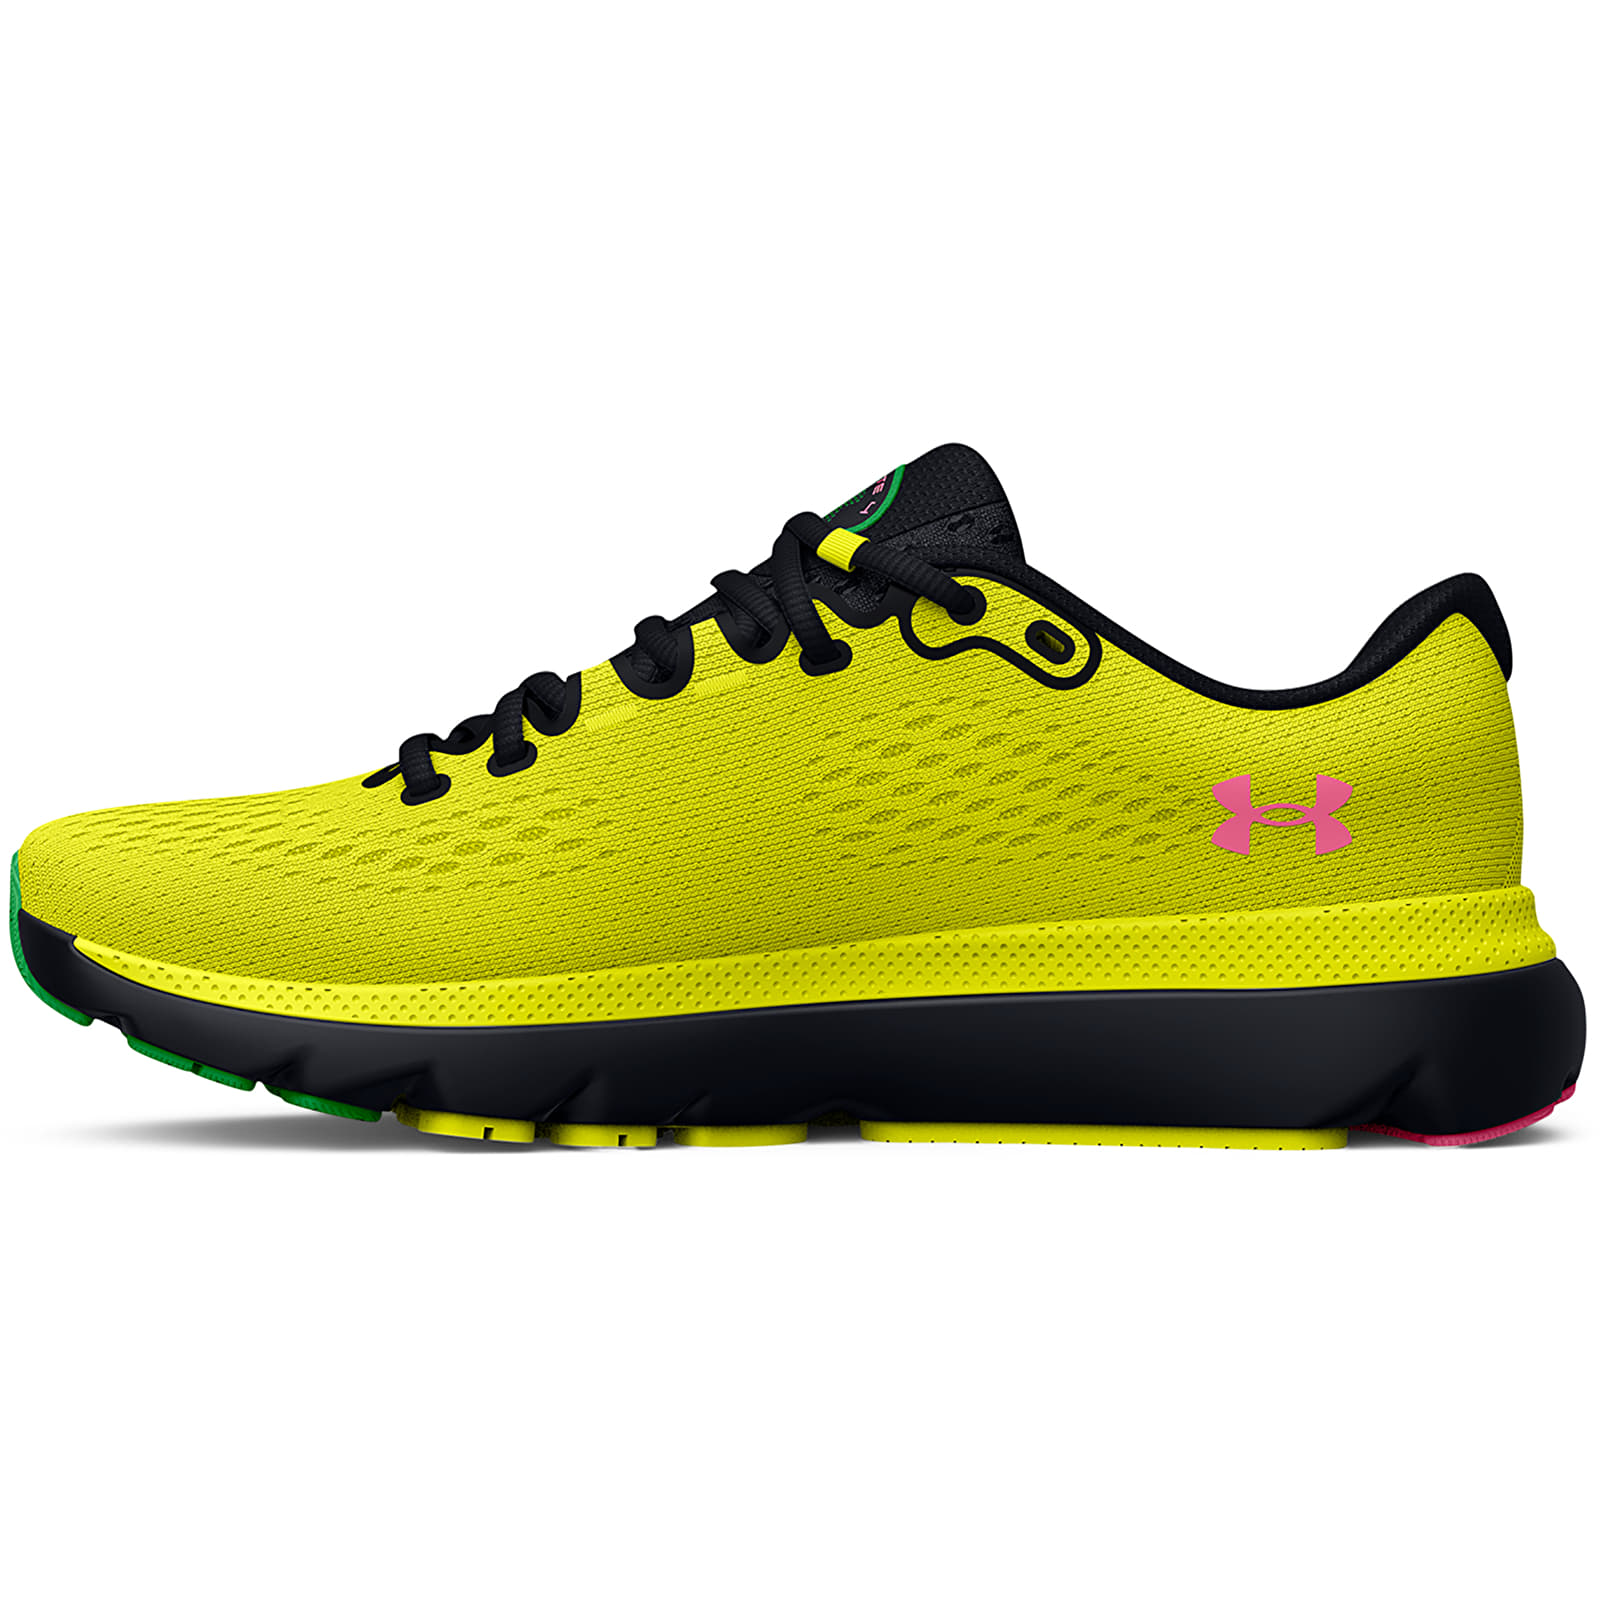 Men's shoes Under Armour HOVR Infinite 4 Yellow Ray/ Black/ Black